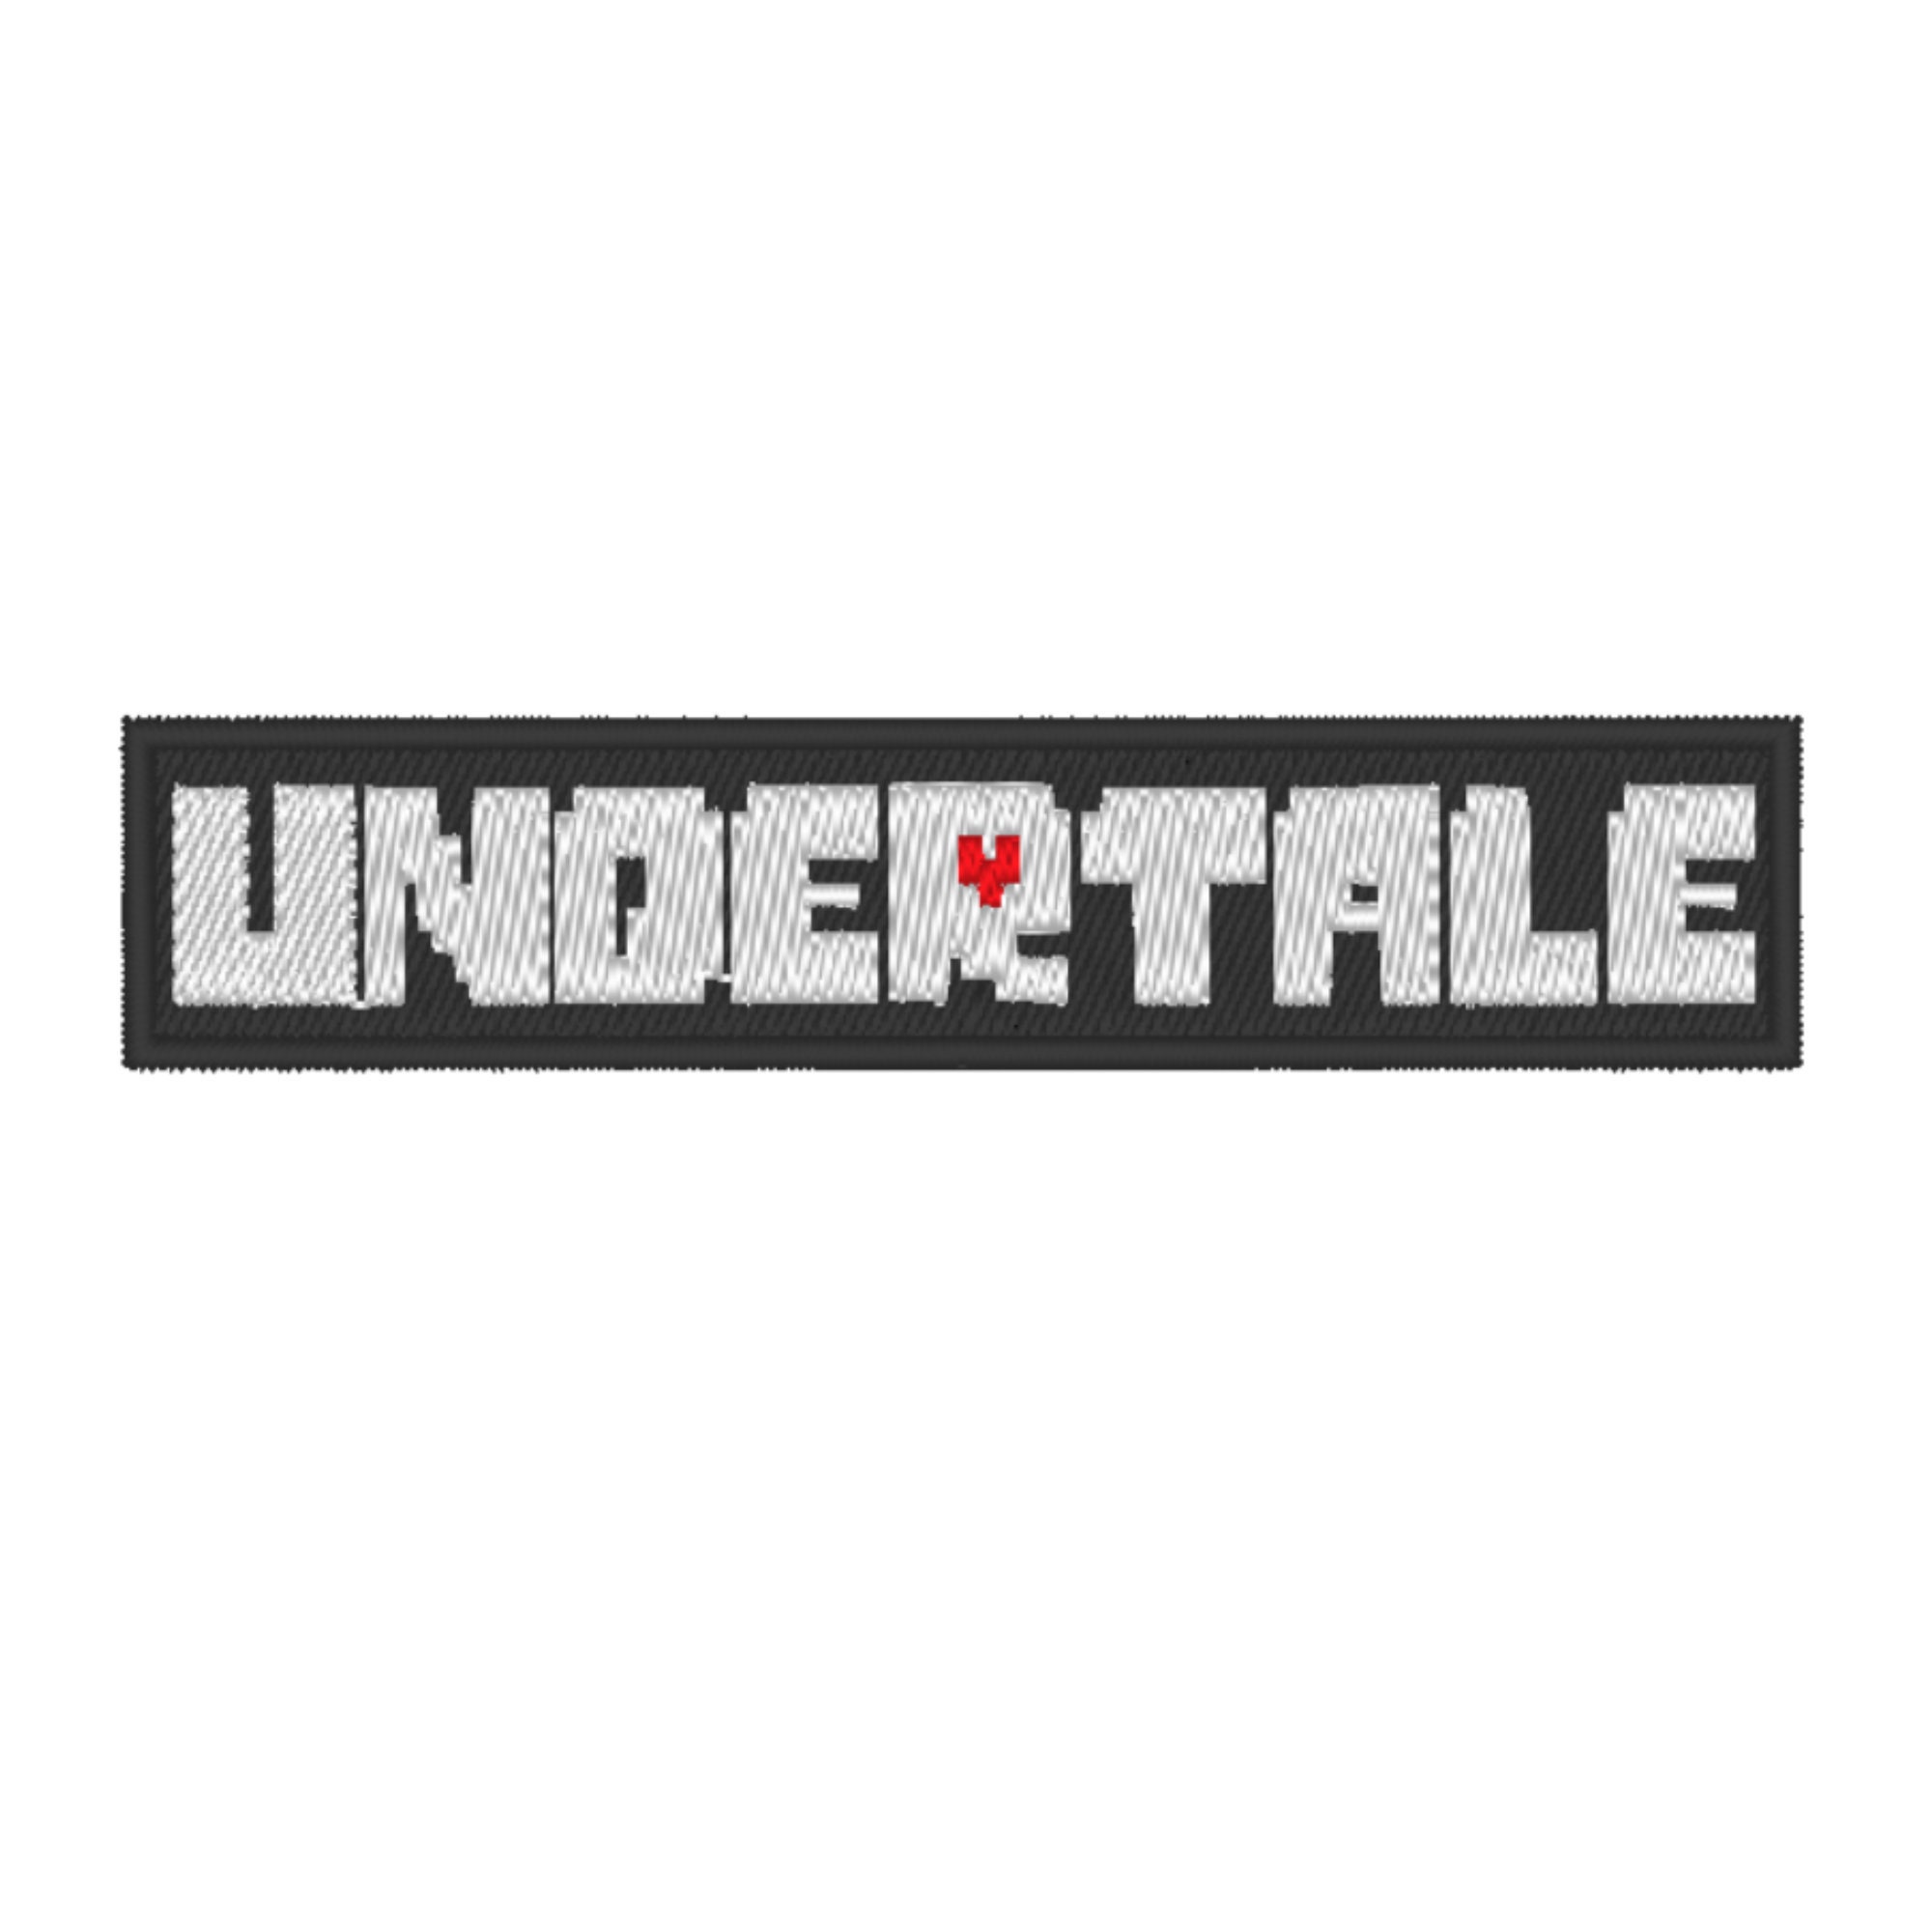 Make Your Own Sans Undertale Pixel Art Iron On Patches For DIY